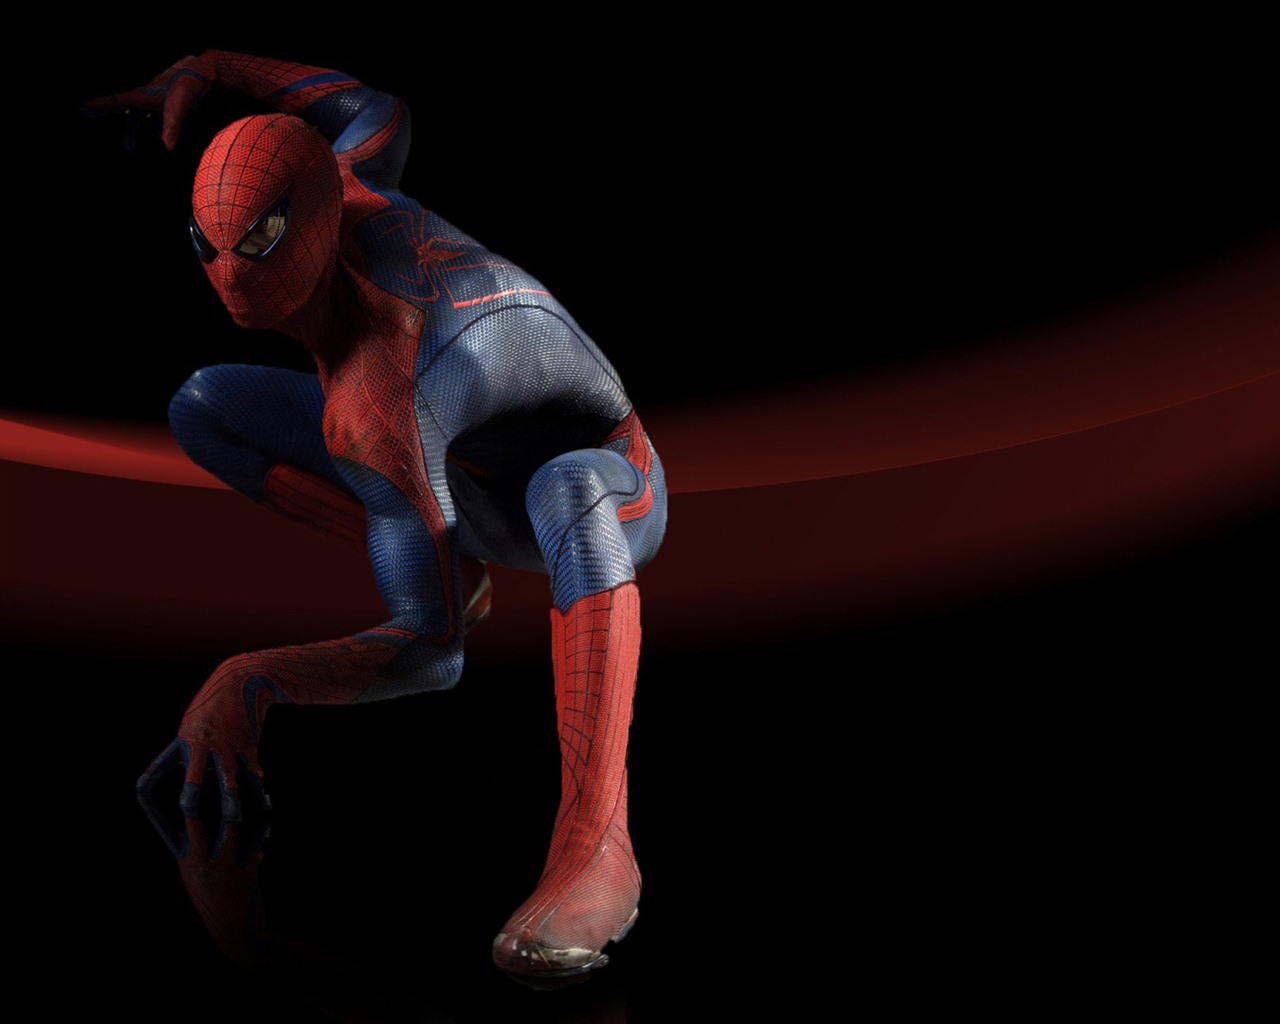 Le 2012 Amazing Spider-Man wallpapers #12 - 1280x1024